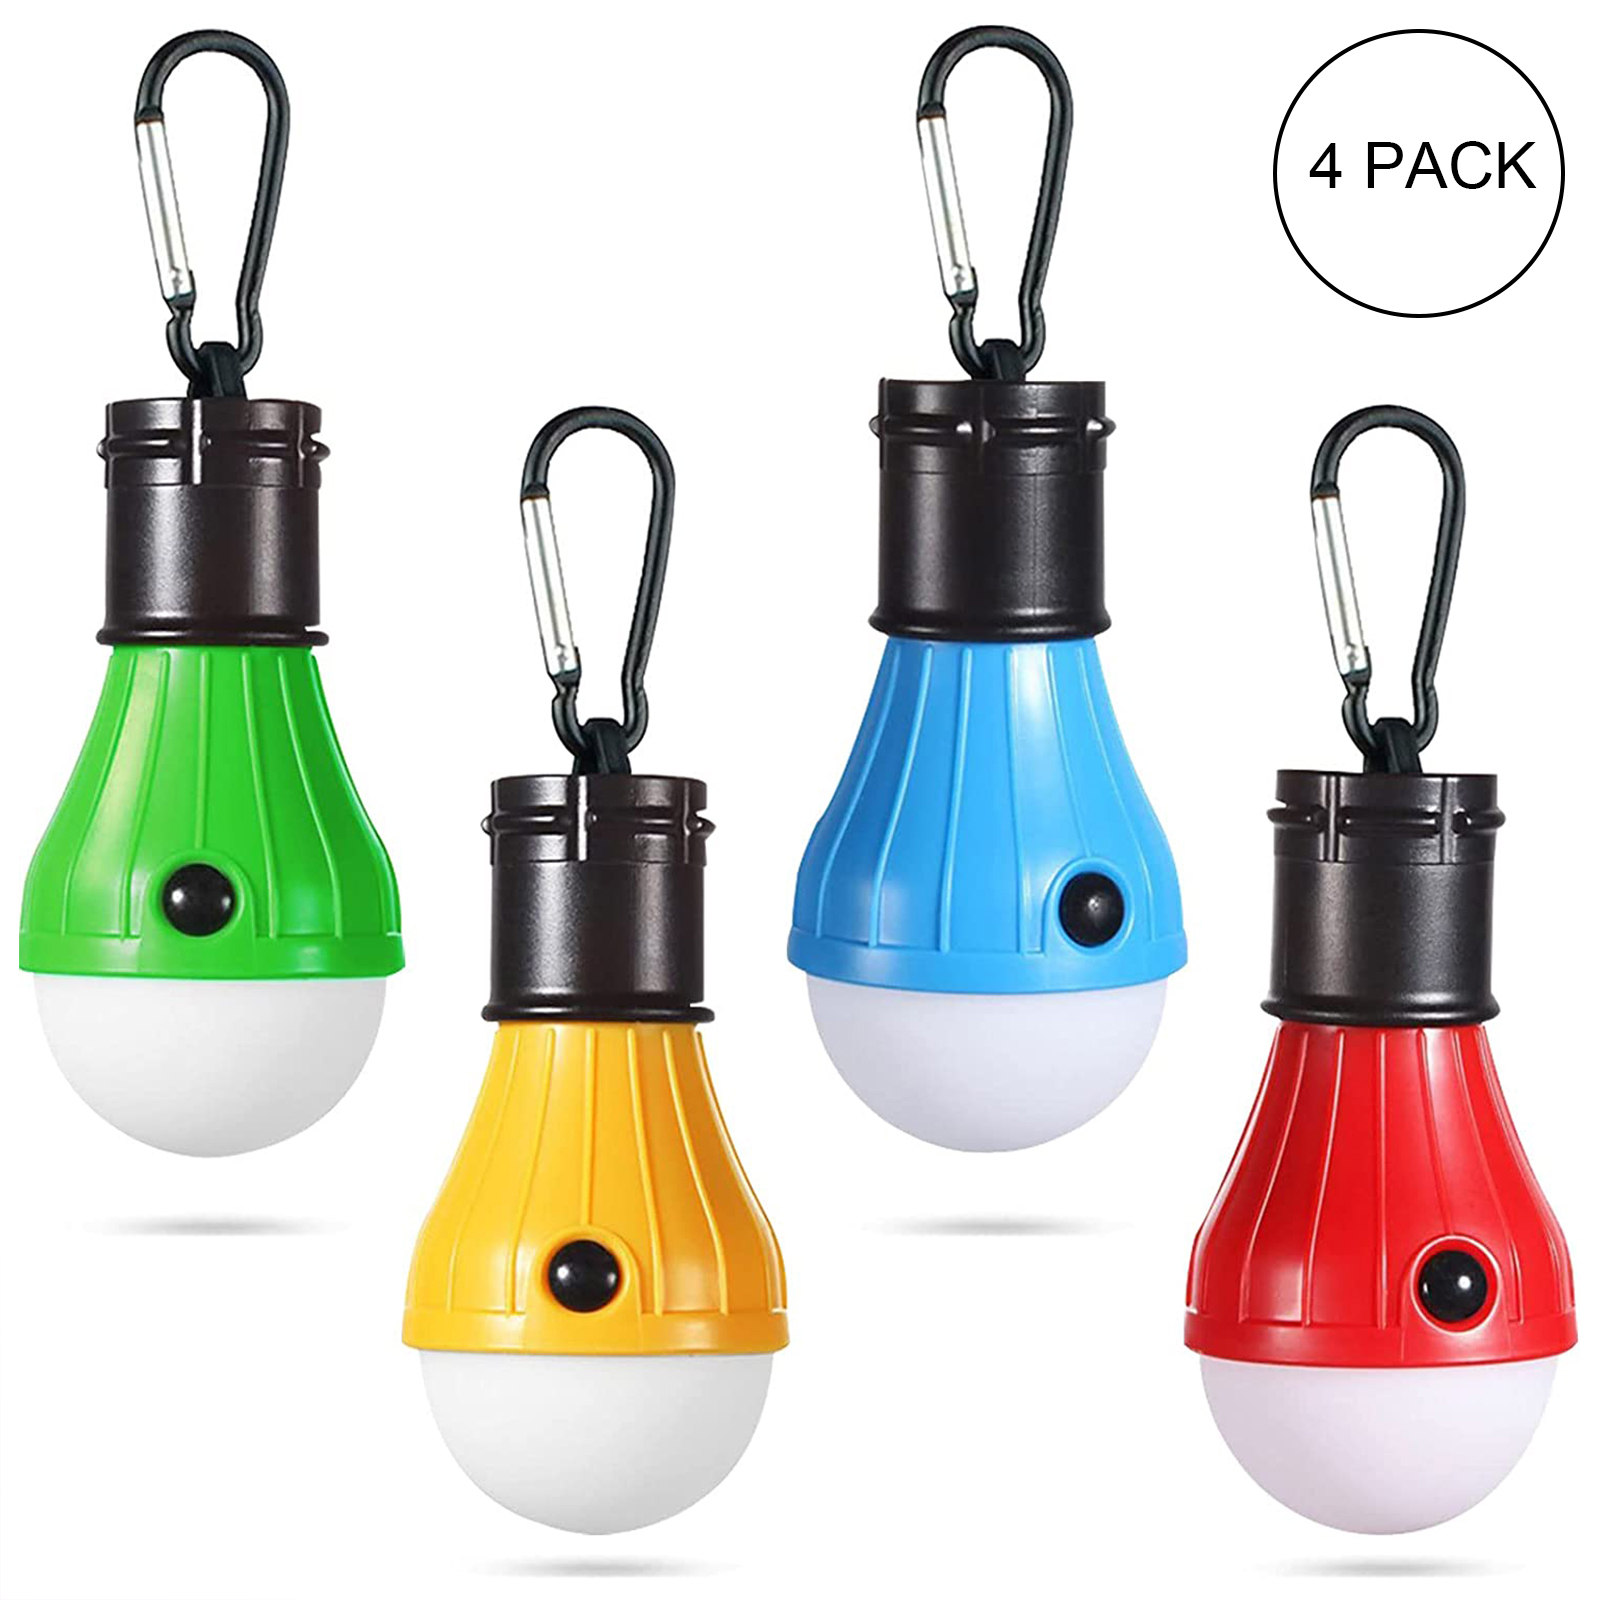 4 Pack Compact Camping Light Bulbs Portable Battery Powered Led